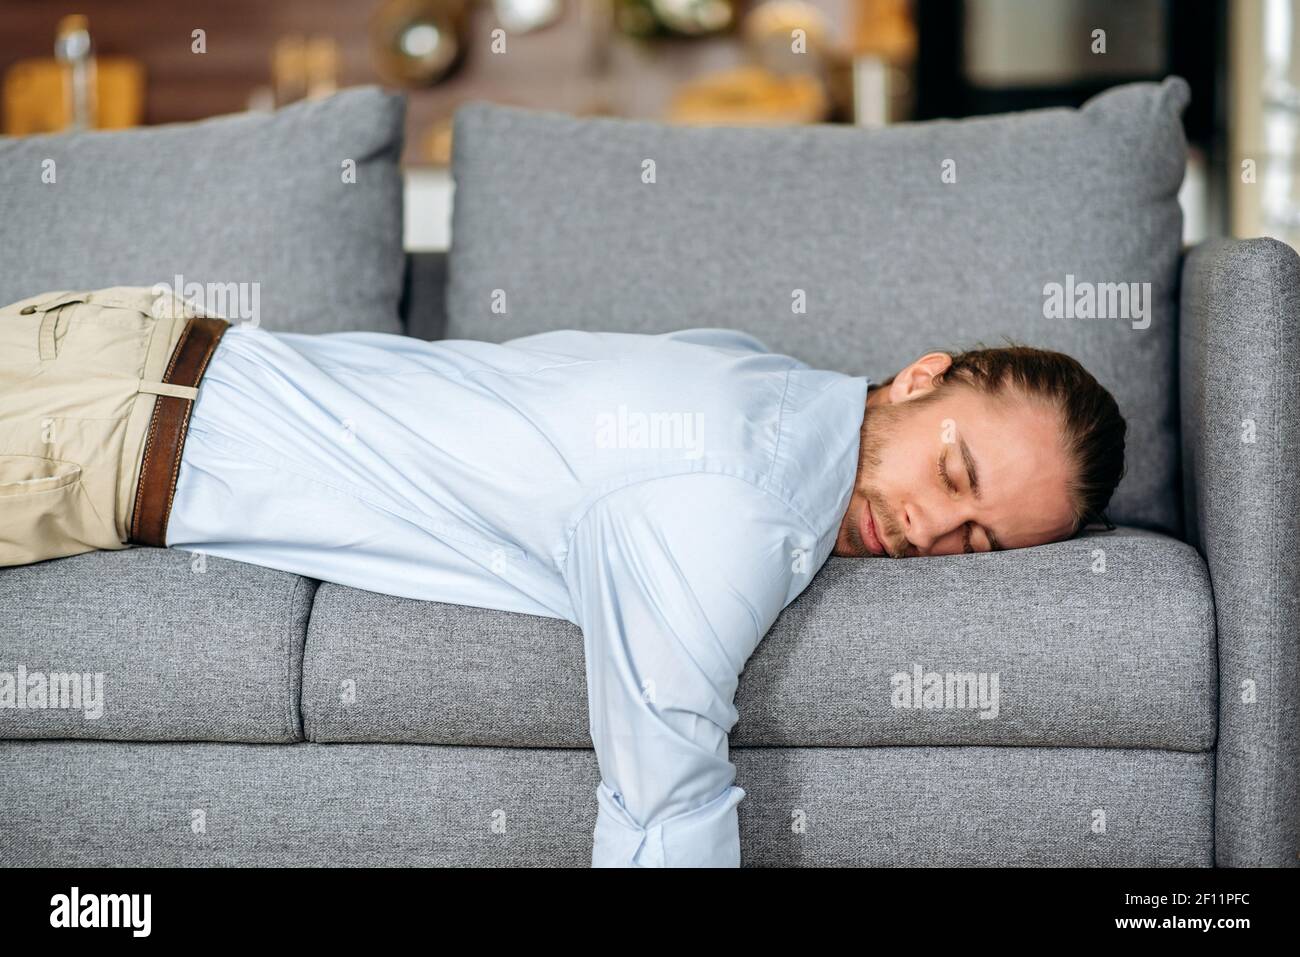 Tired guy, businessman or student dressed in formal clothes, lying on the couch, tired of work or study, collapsed from fatigue, at home in the living room, need a rest or vacation Stock Photo